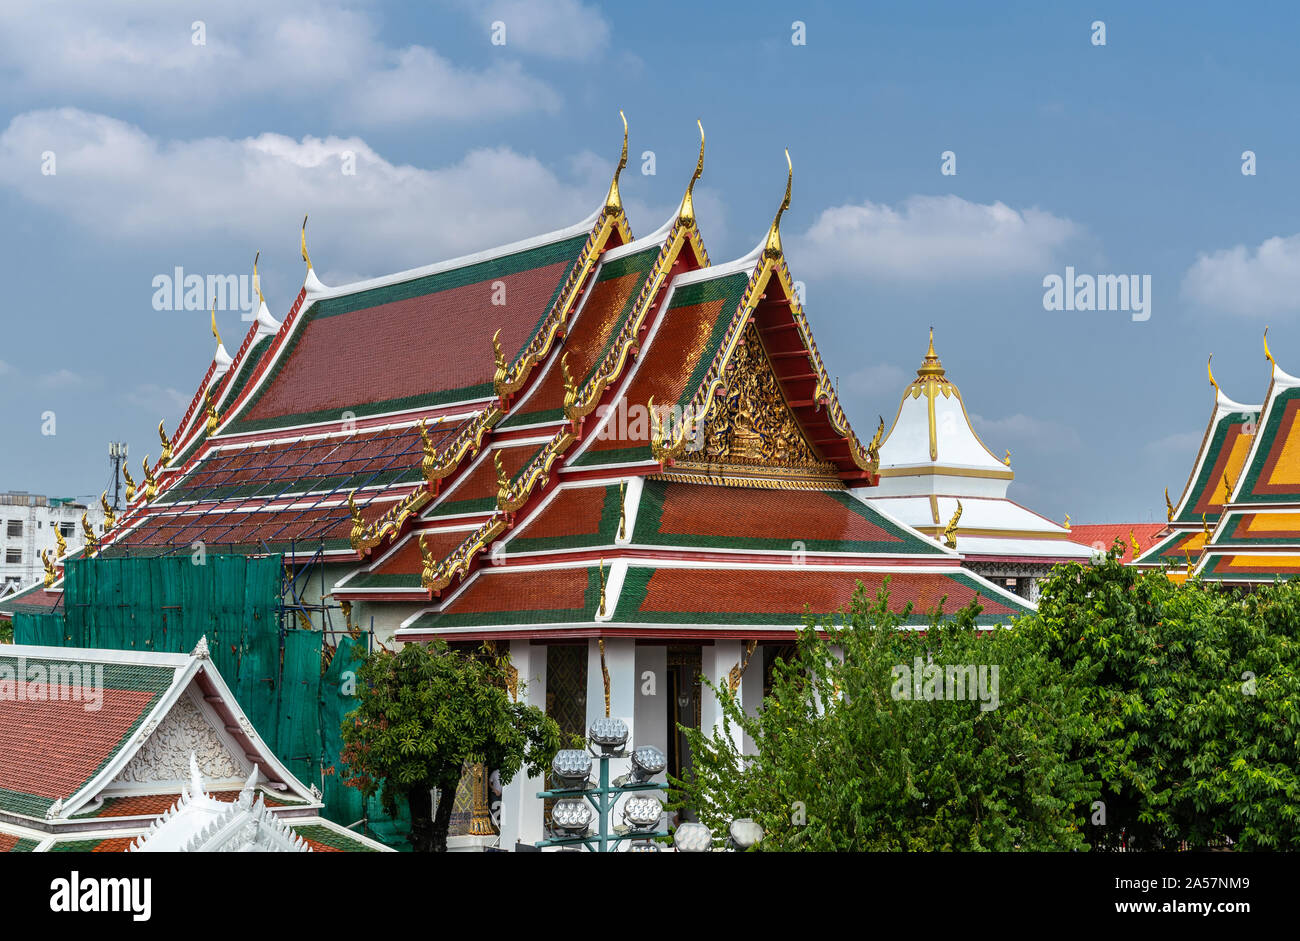 Bangkok city, Thailand - March 17, 2019: Roofs of Ordination hall and offices at Temple of Dawn against blue sky with white clouds. Stock Photo